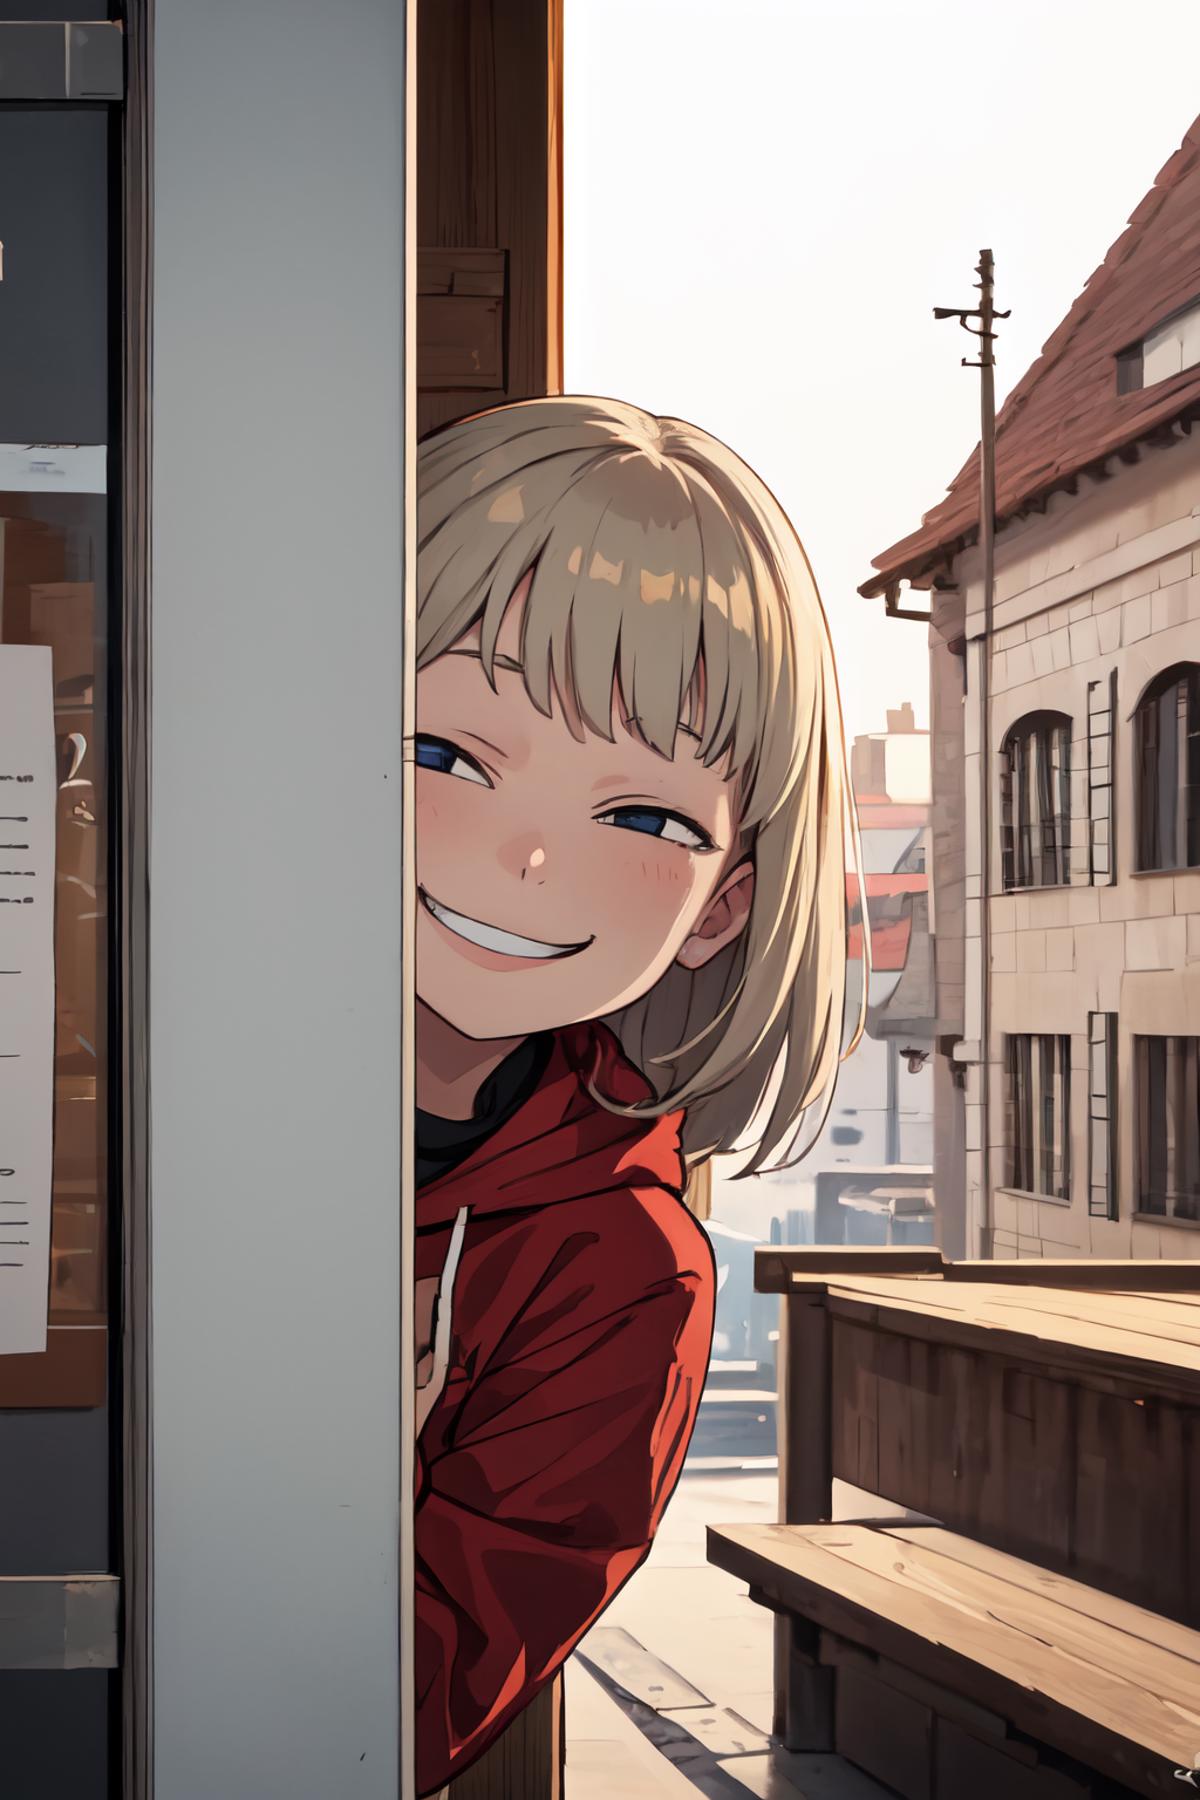 A smiling girl with blond hair peeking out from behind a door.